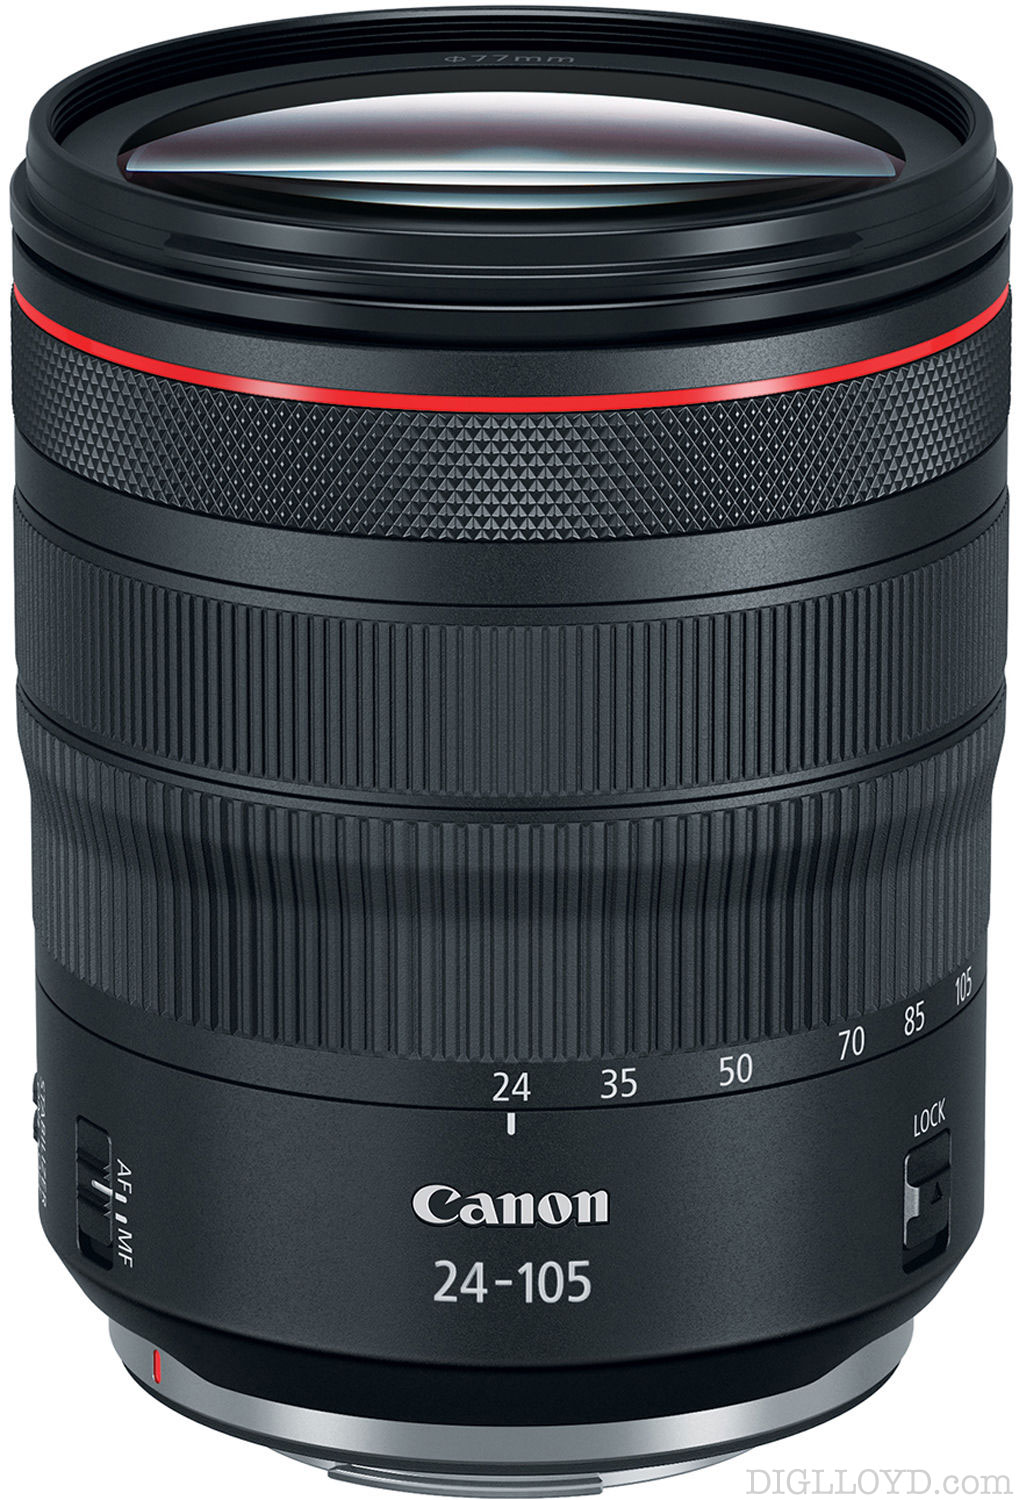 image of Canon RF 24-105mm f/4L IS USM